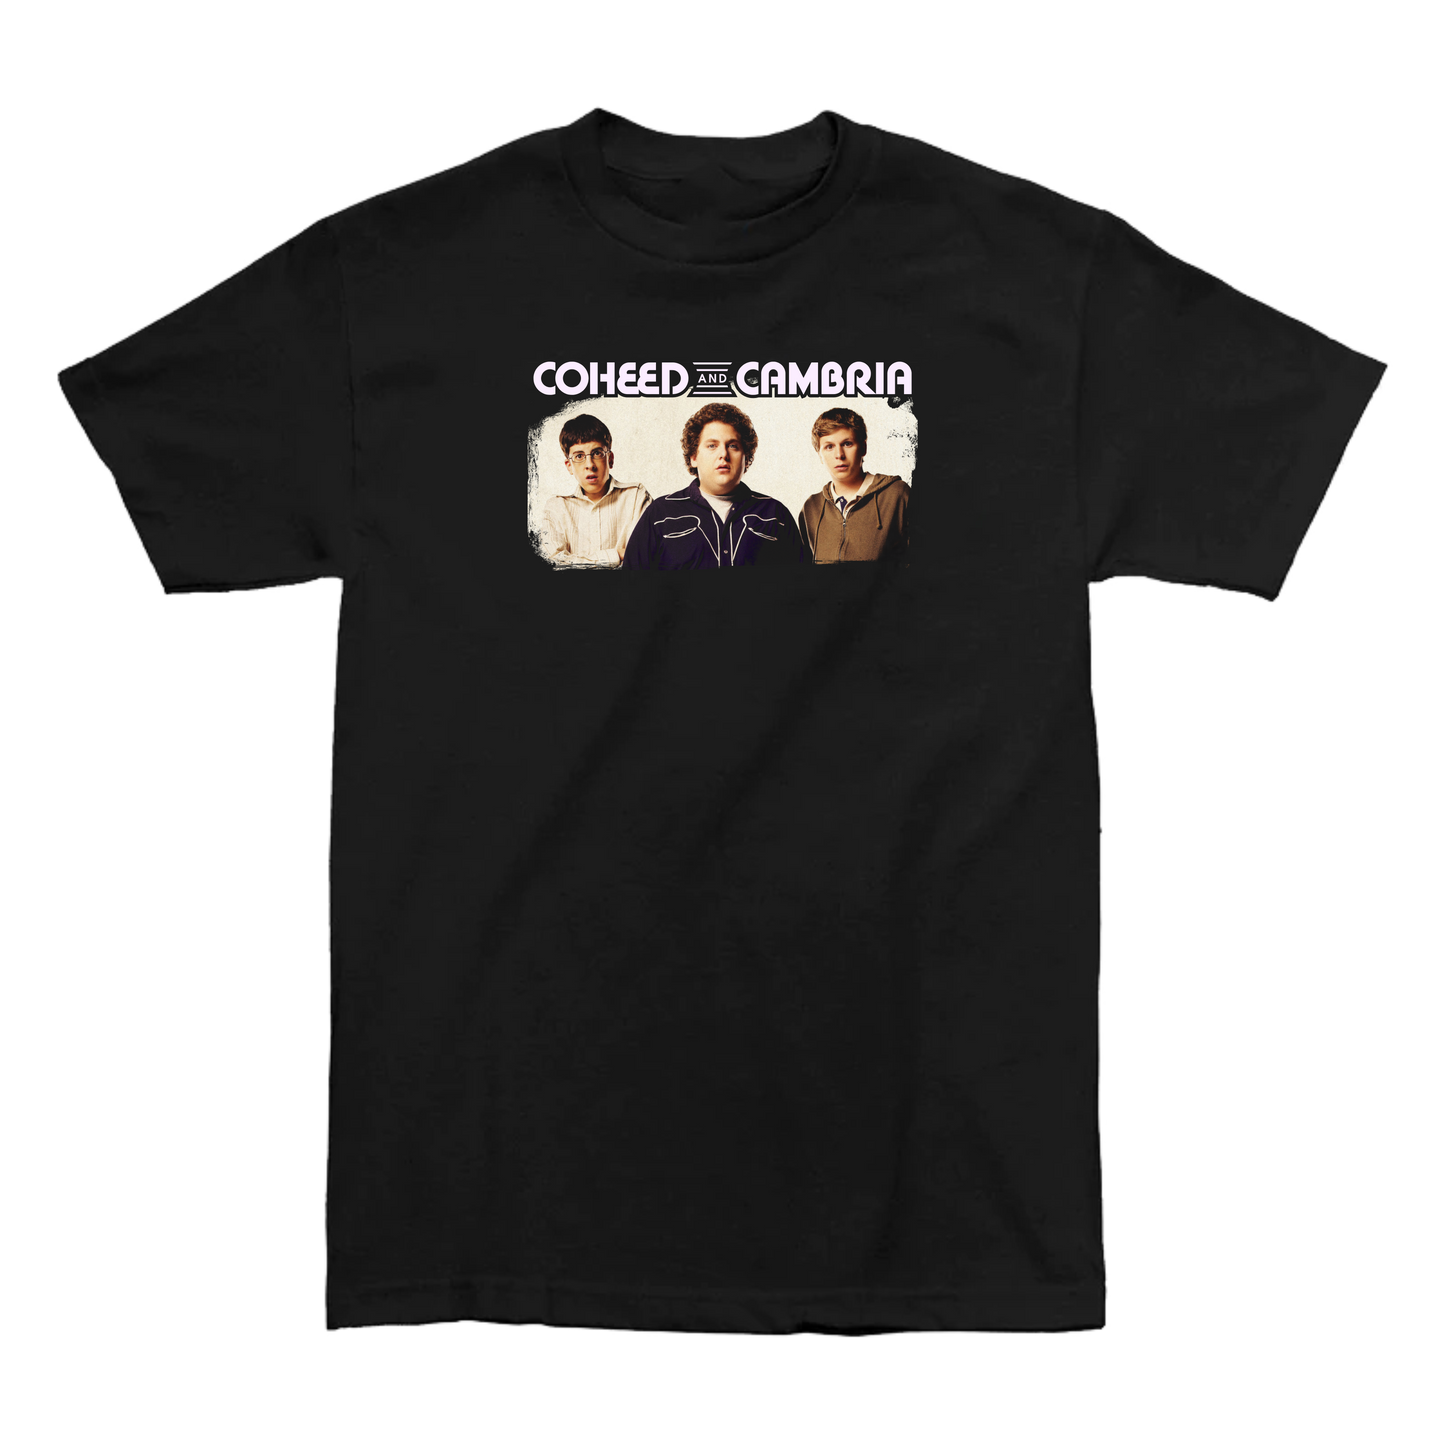 COHEED AND SUPERBAD  |  COHEED AND CAMBRIA  |  SUPERBAD